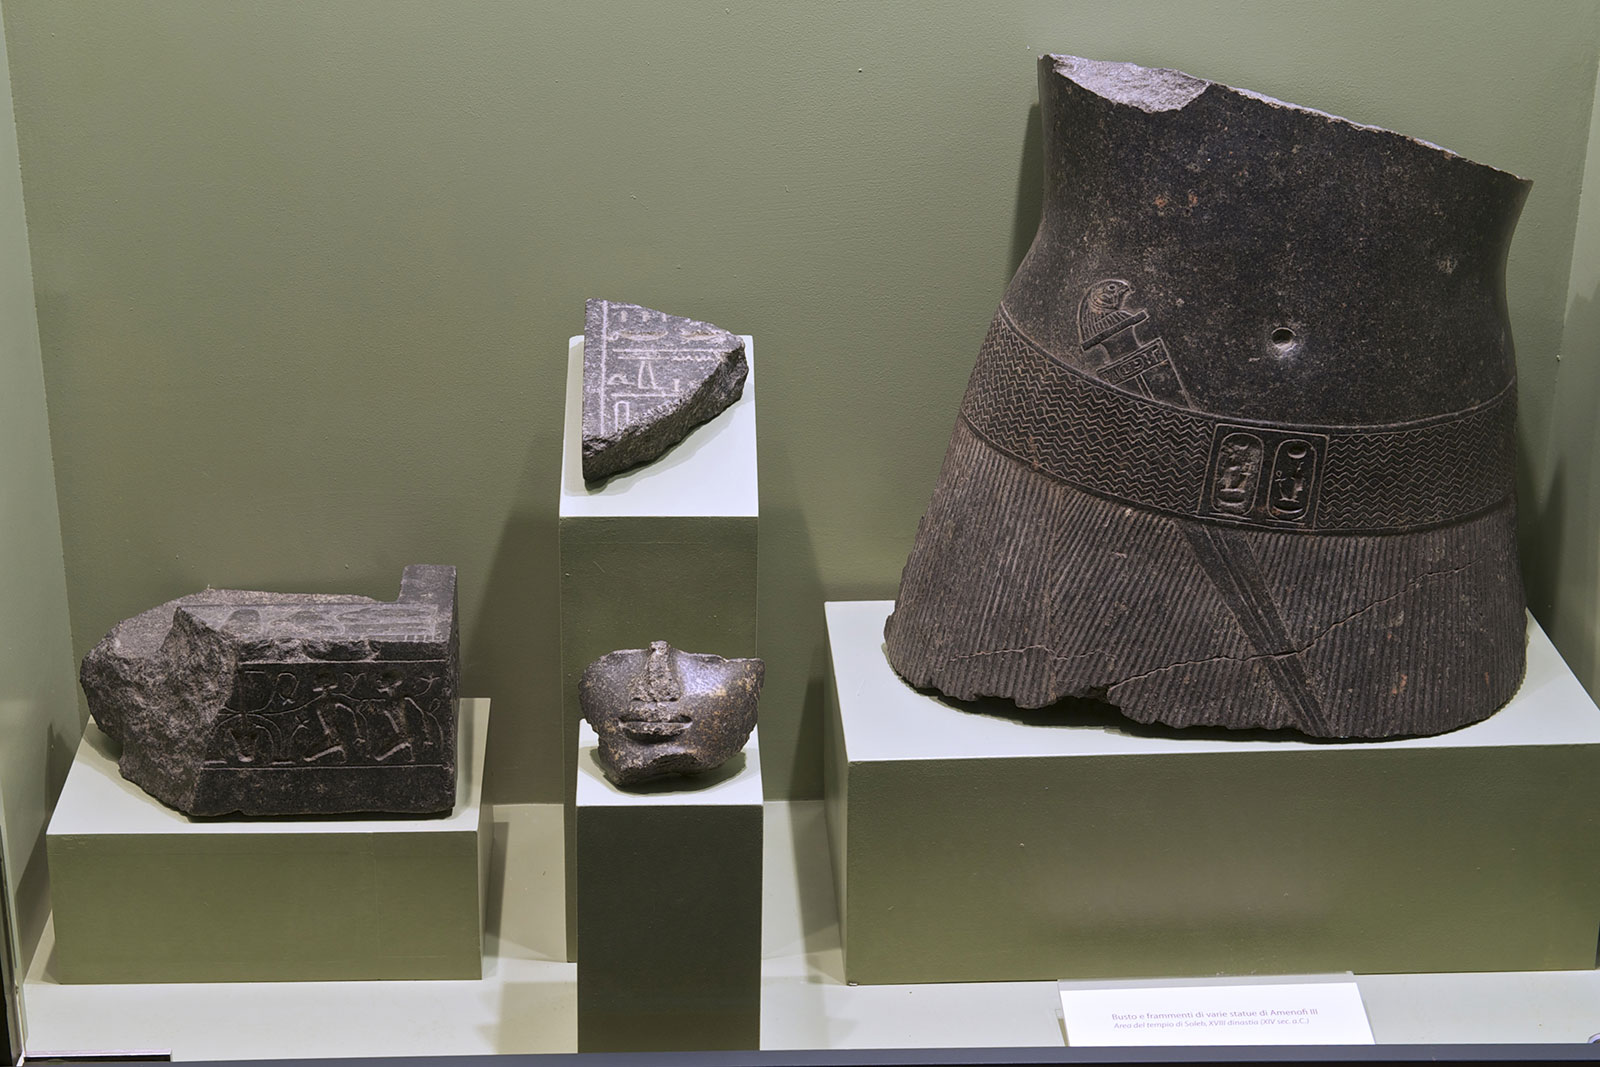 Some of the objects inside the museum